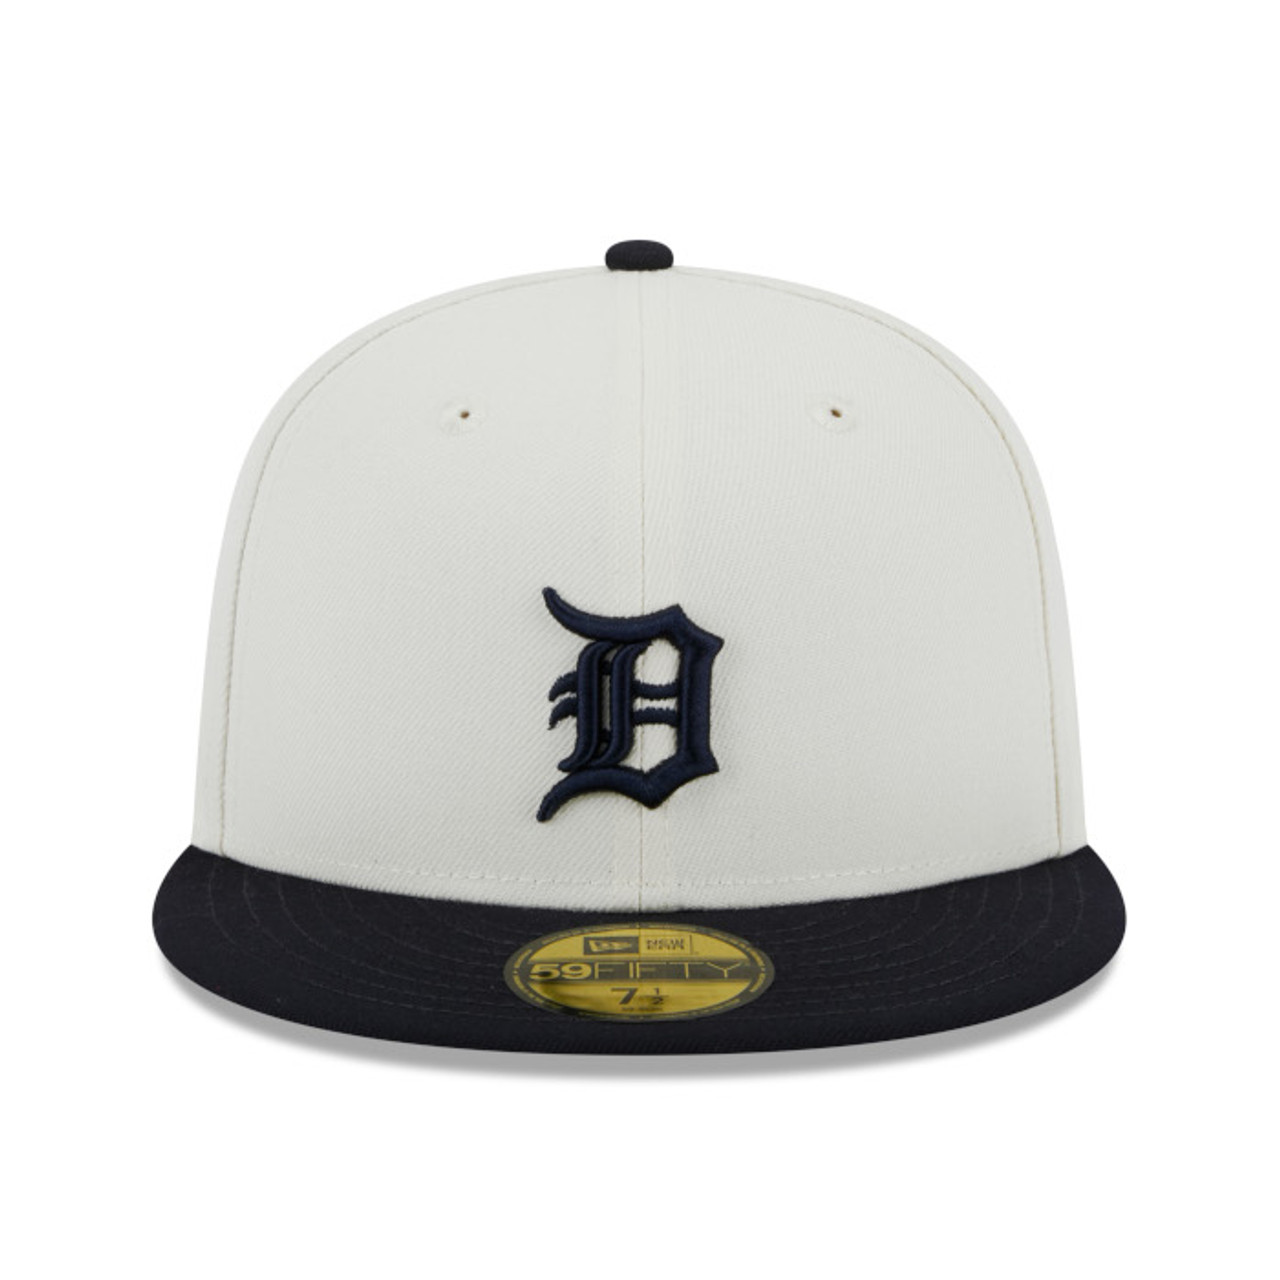 Detroit Tigers Cooperstown Jersey, Cooperstown Collection, Throwback Tigers  Gear